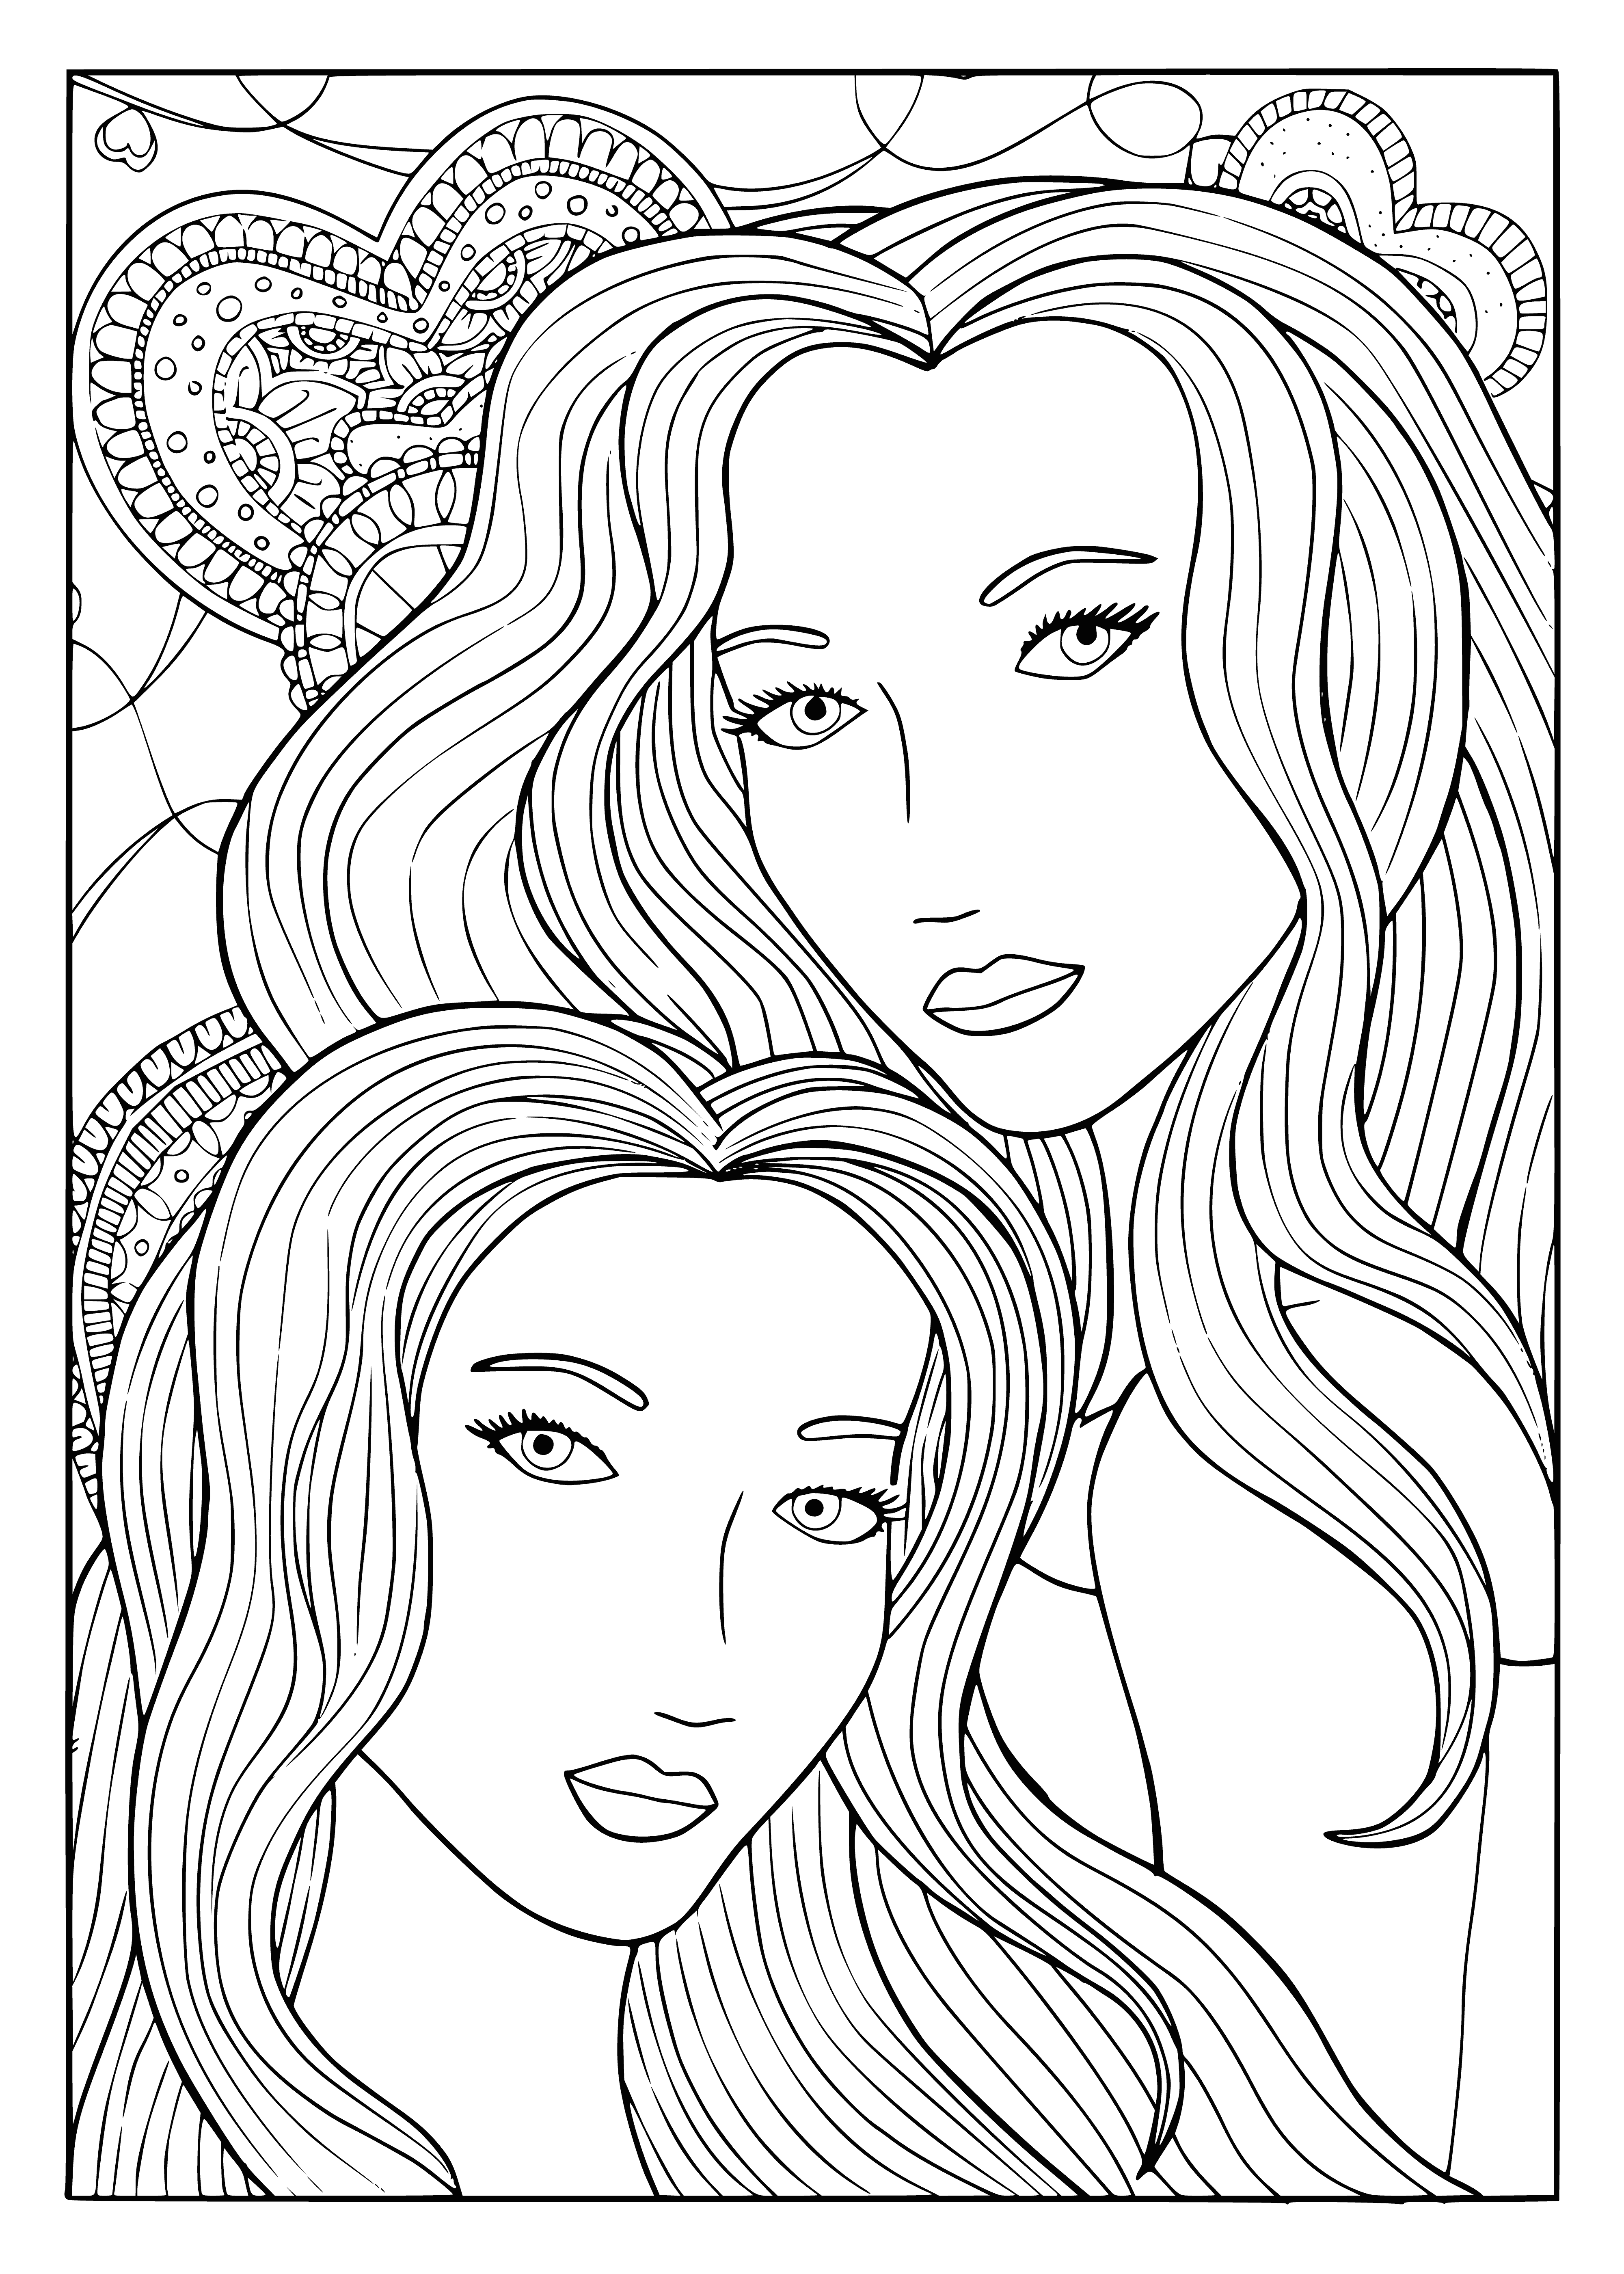 Girlfriends coloring page